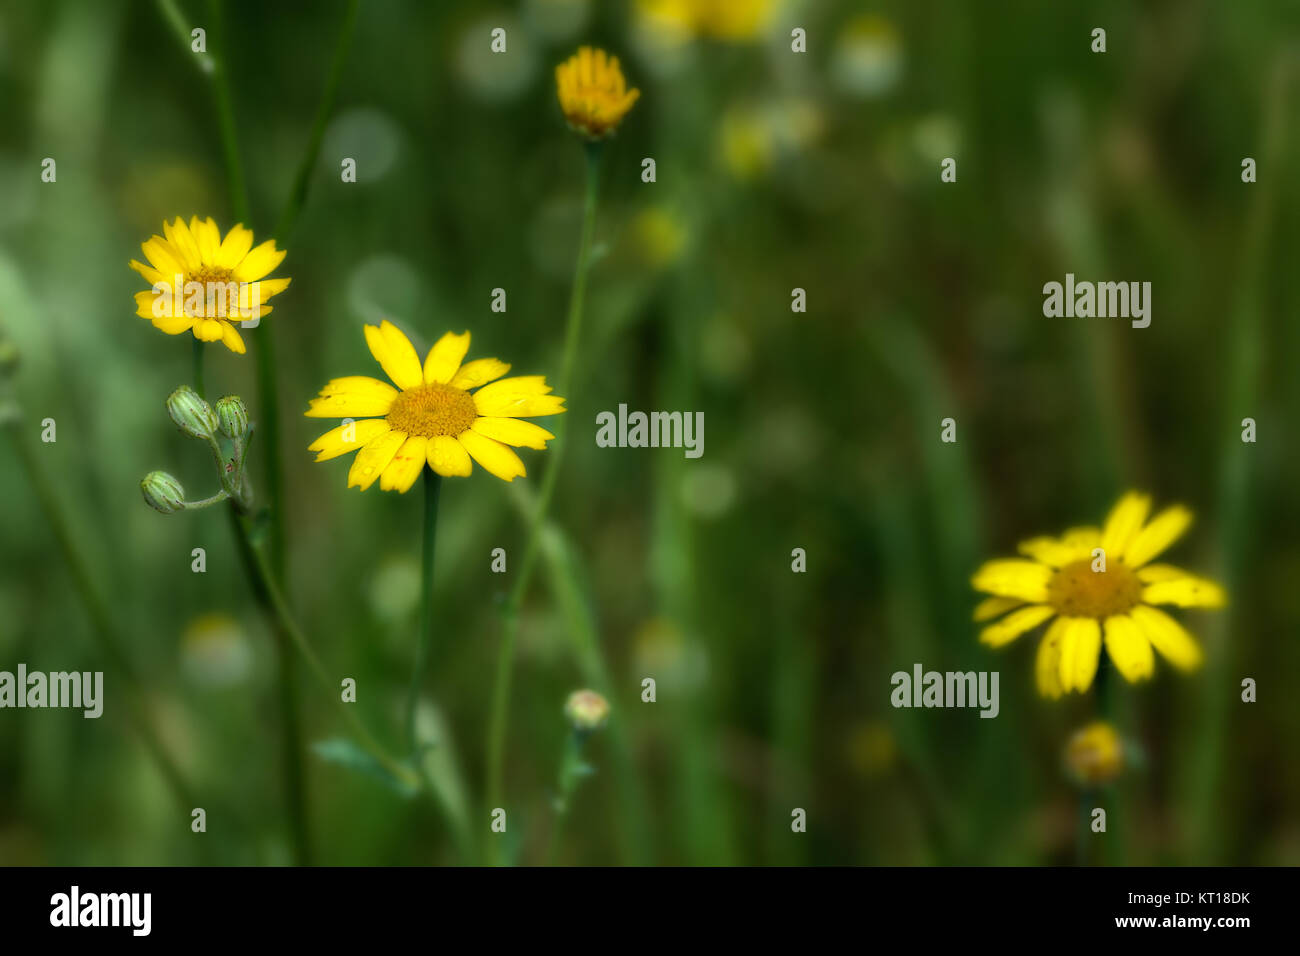 Daisies photographed in their natural environment. Stock Photo